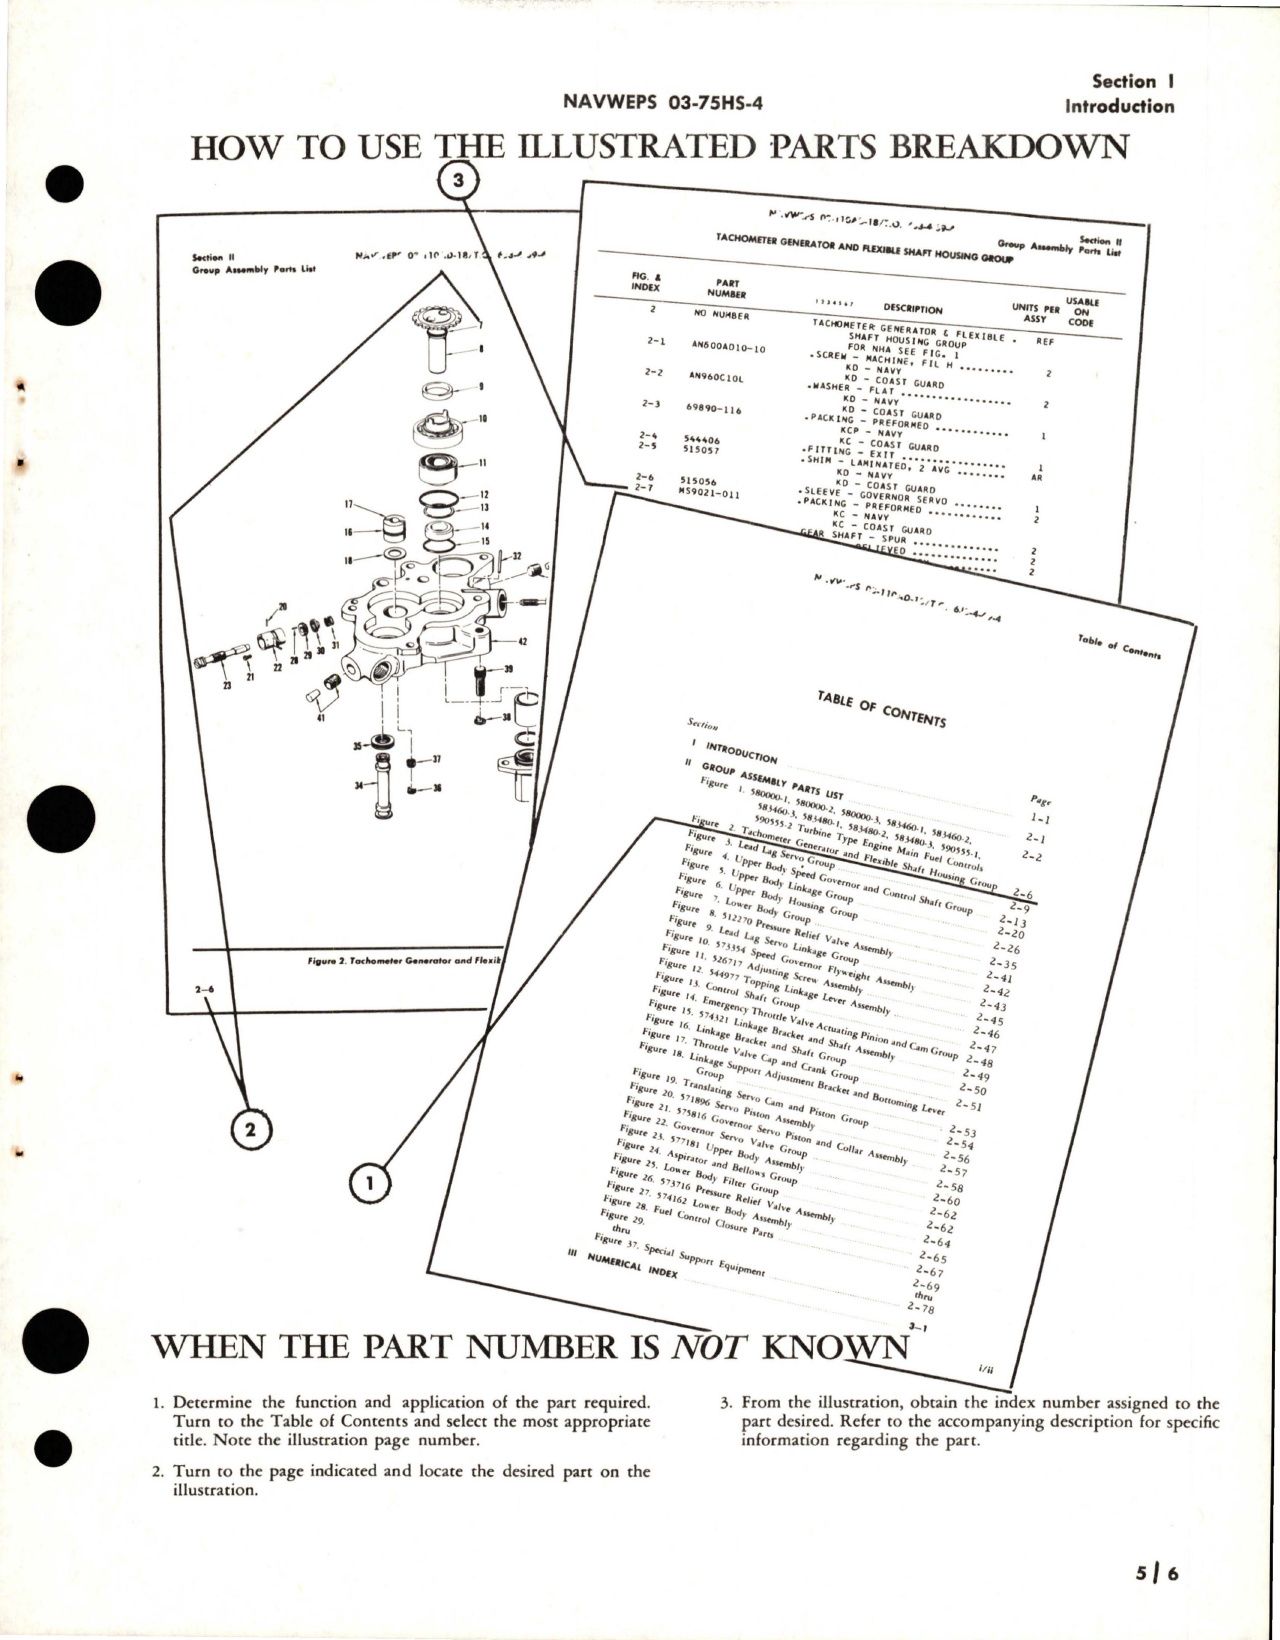 Sample page 9 from AirCorps Library document: Illustrated Parts Breakdown for Selector and Indicator - 588530-3, Temperature Controllers 588531-3, 533531-5, and Ice Limiting Sensor 588532-1